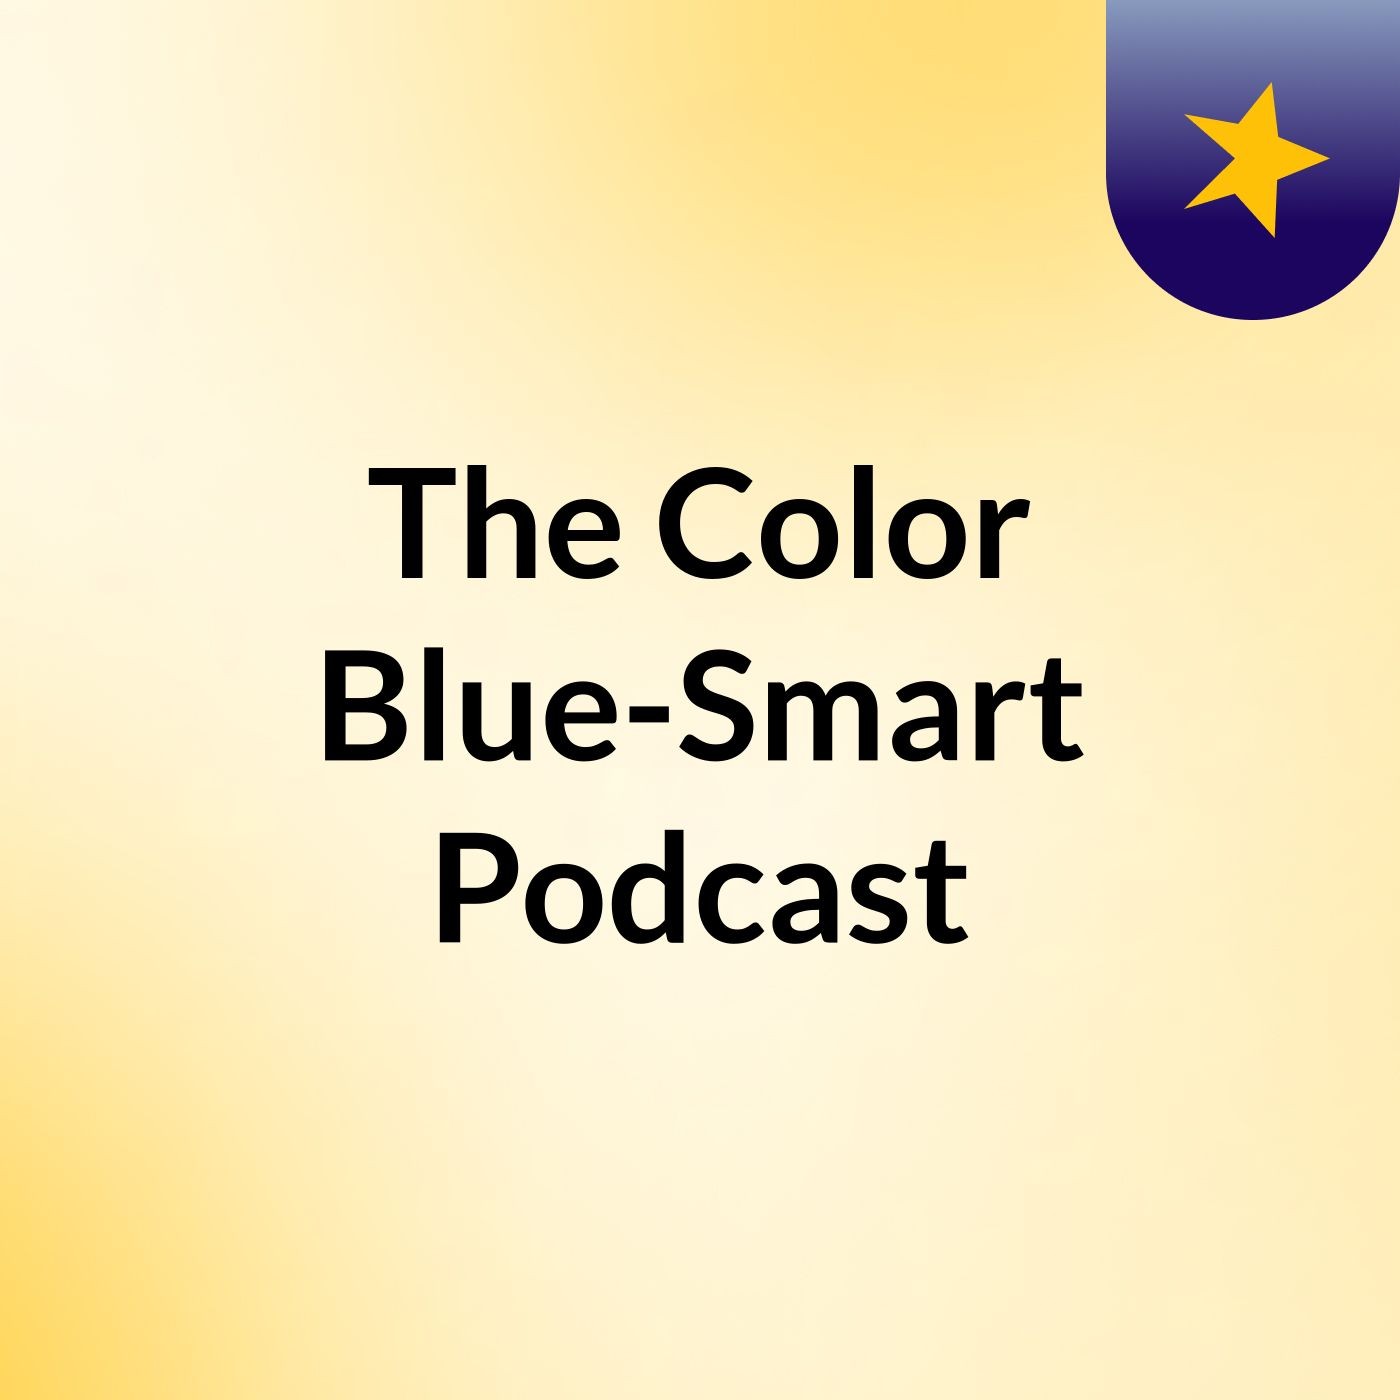 The Color Blue-Smart Podcast